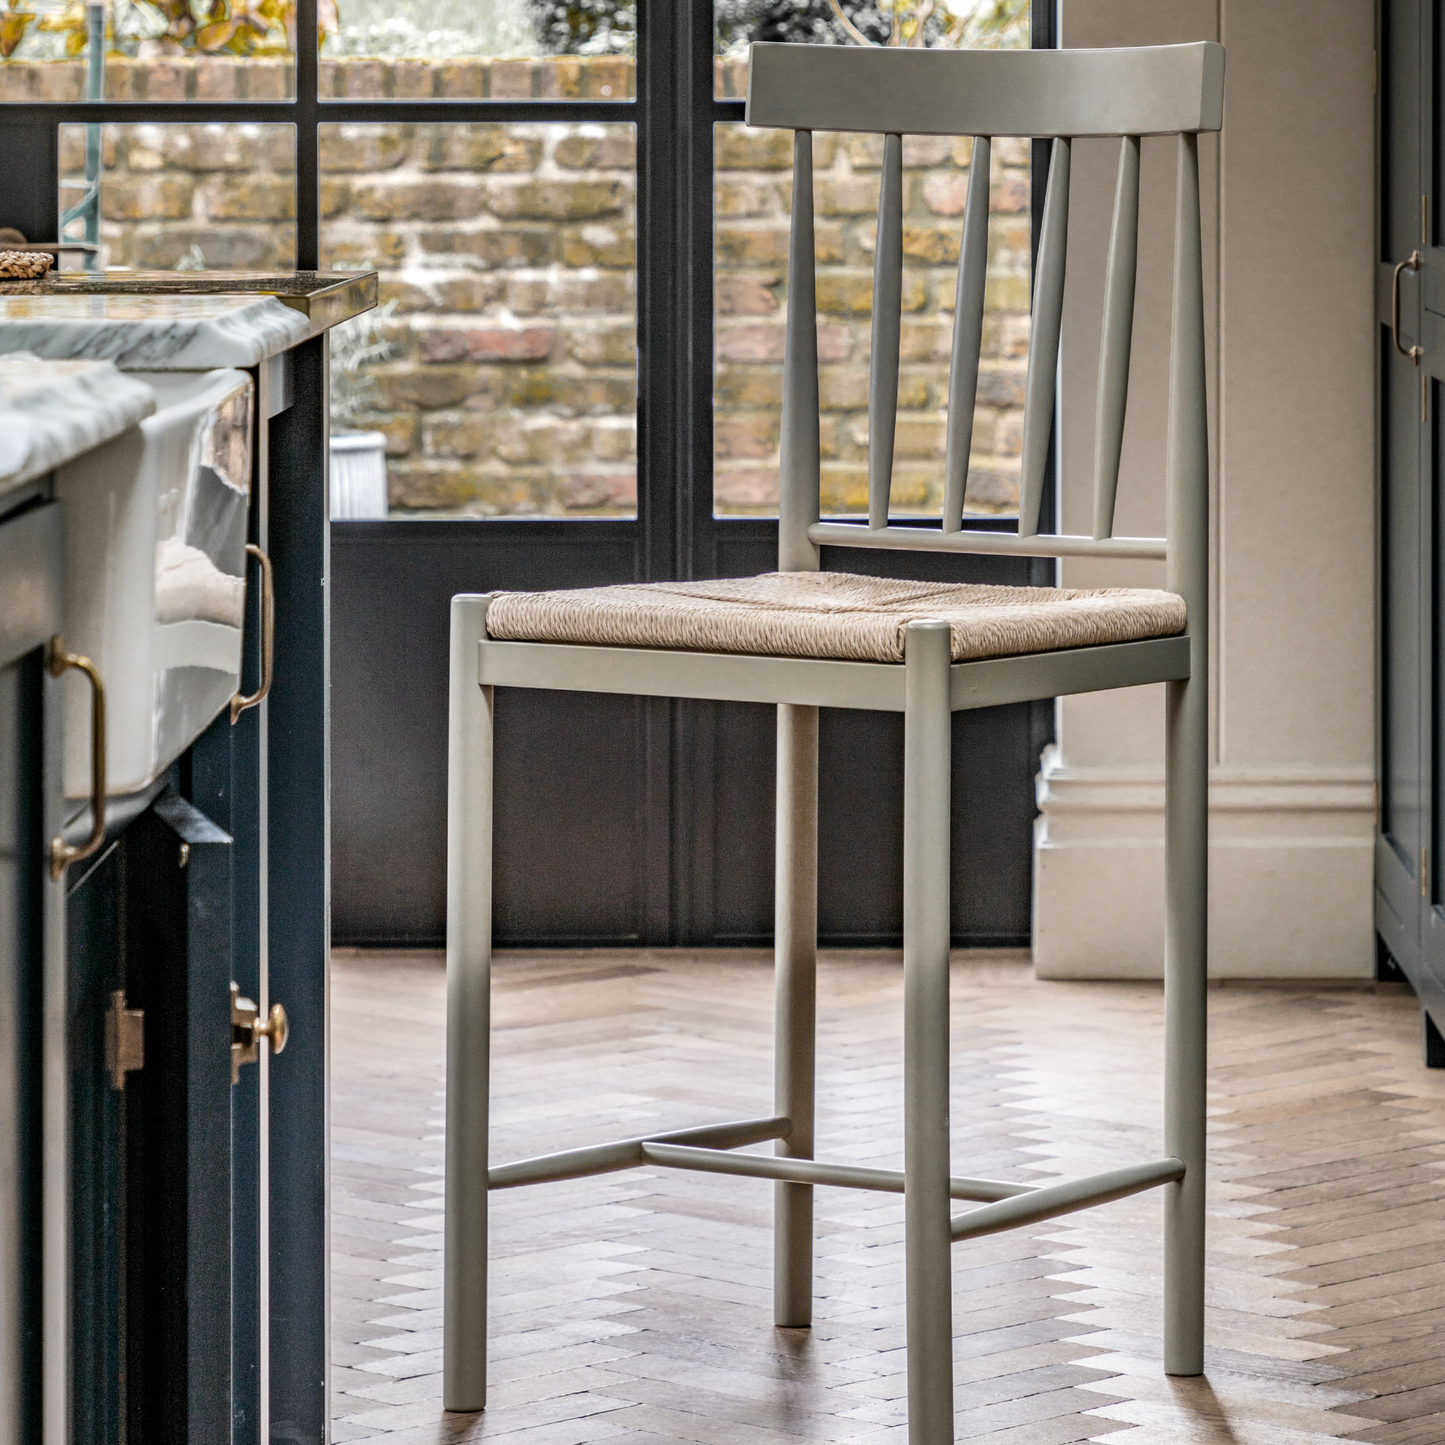 A kitchen featuring Buckland Bar Stools in Prairie 2pk, complementing the interior decor of the home furniture.